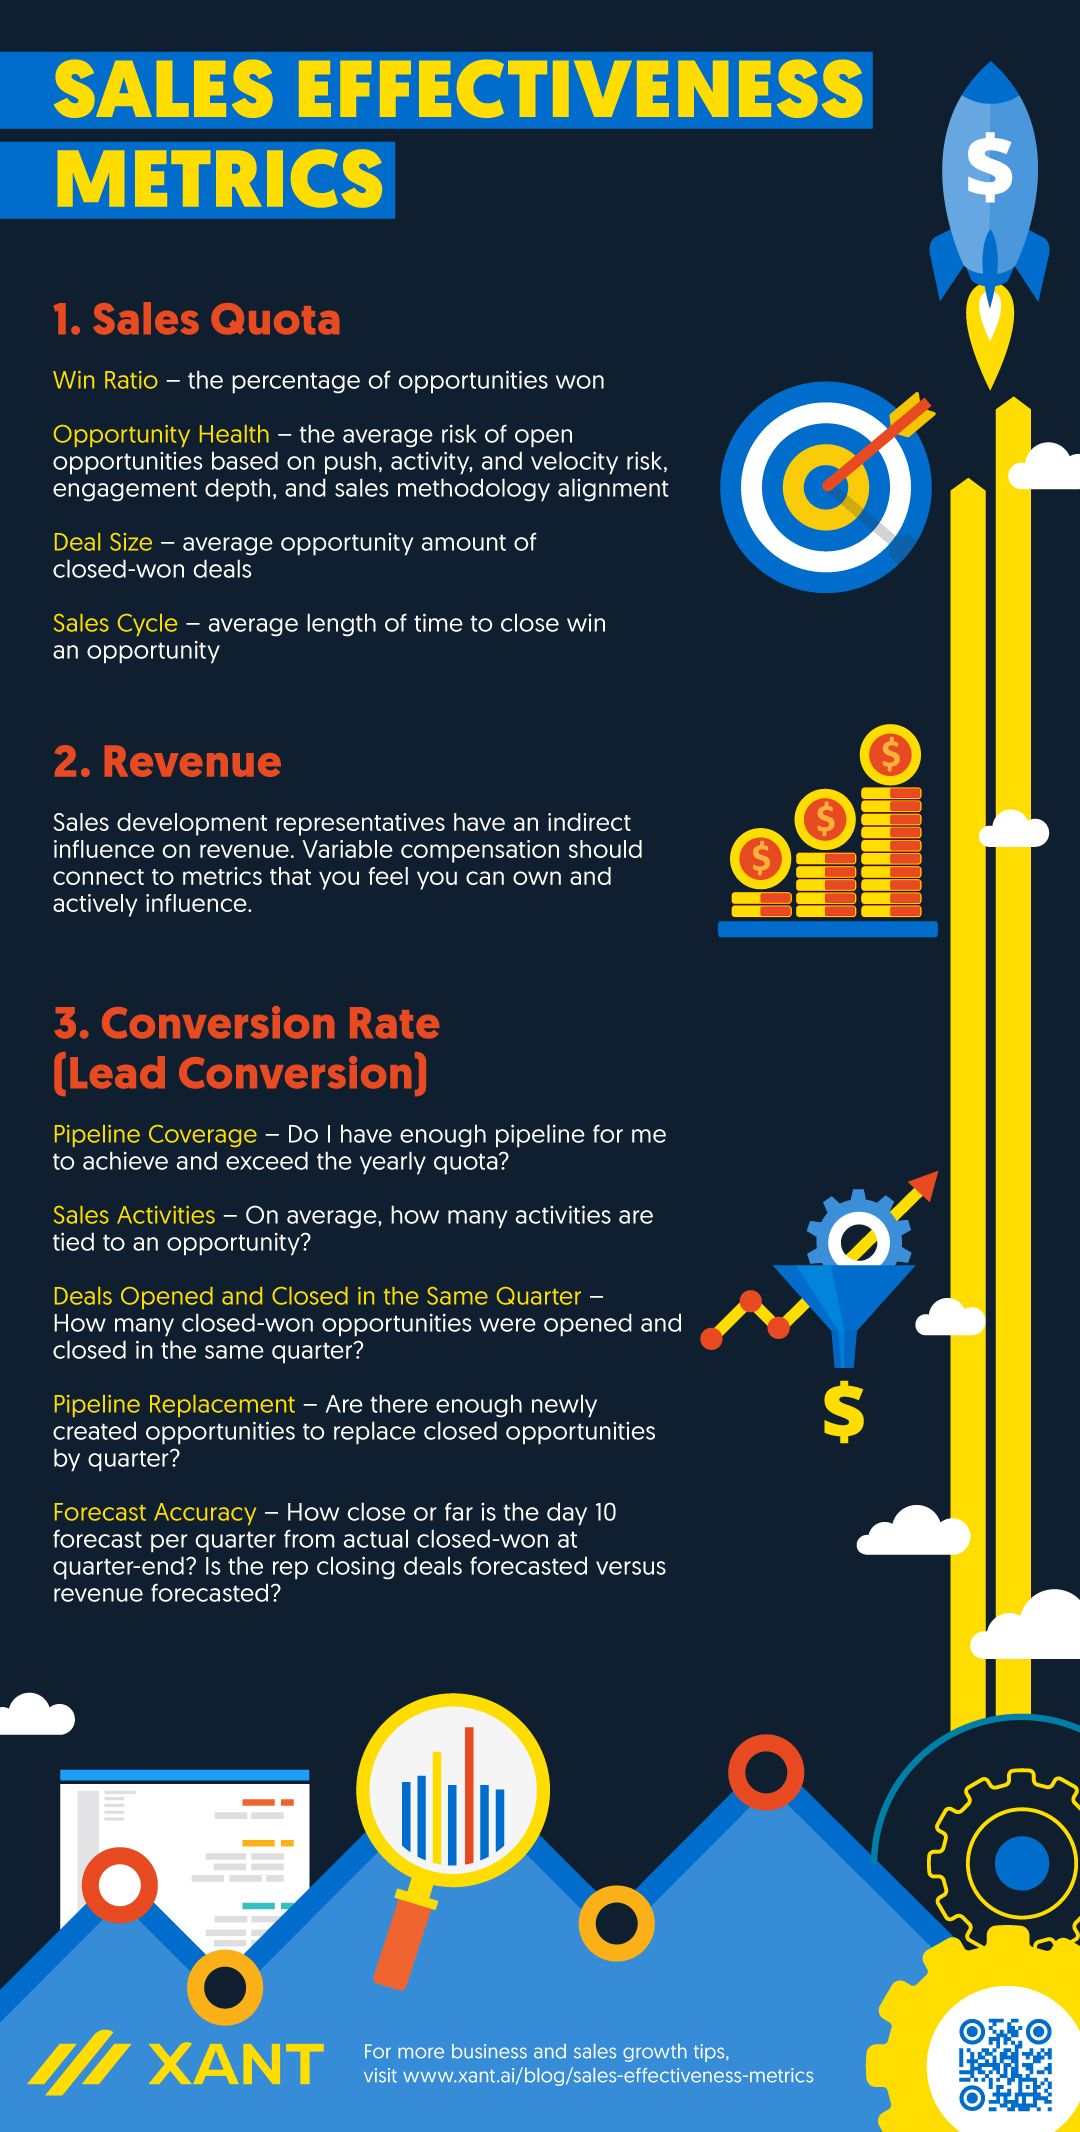 Sales Effectiveness Metrics For Evaluating Your Team [INFOGRAPHIC]